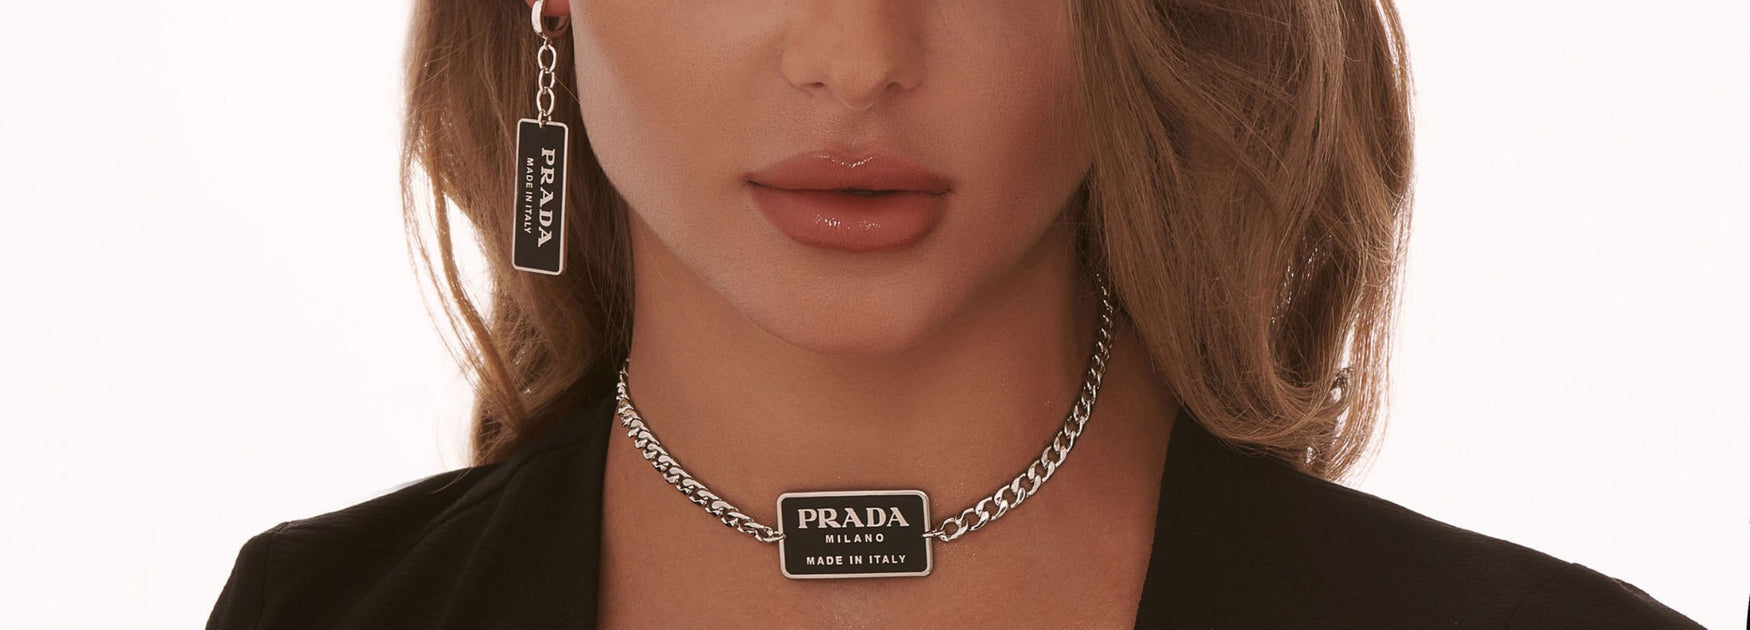 Prada Crystal, Silk, Mesh & Bead Embellished Covered Bead Collar Necklace -  Black Collar, Necklaces - PRA934833 | The RealReal